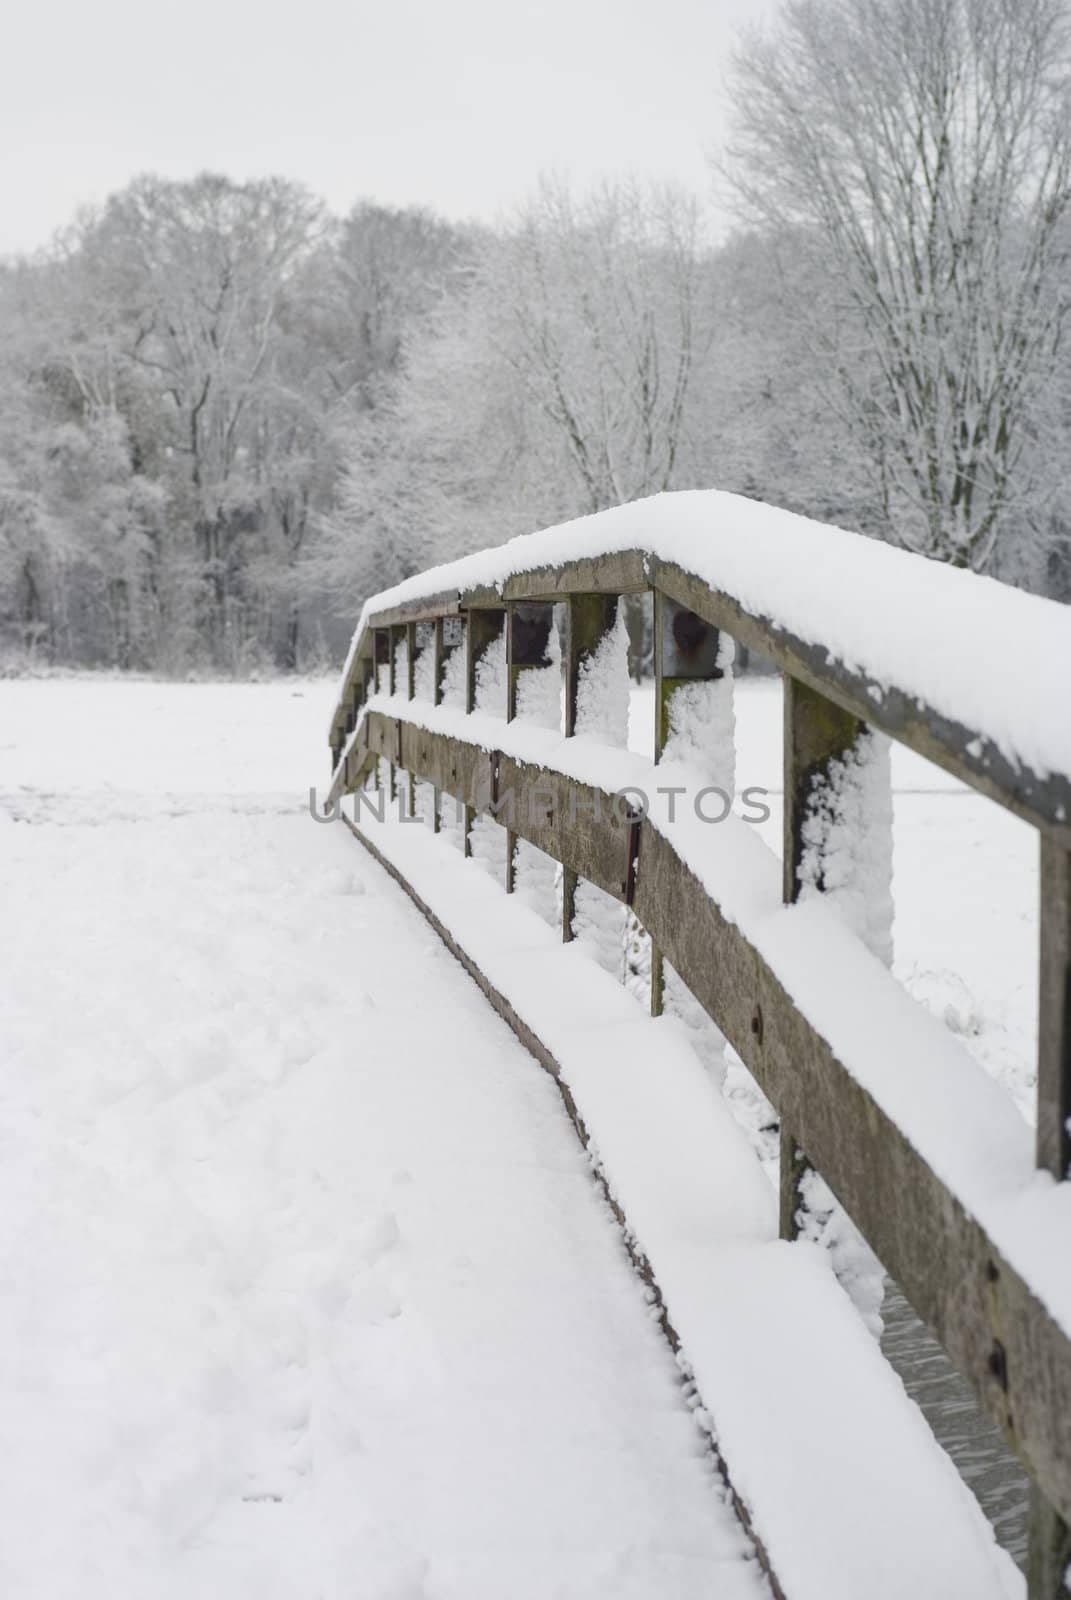 Part of a wooden bridge covered with snow.